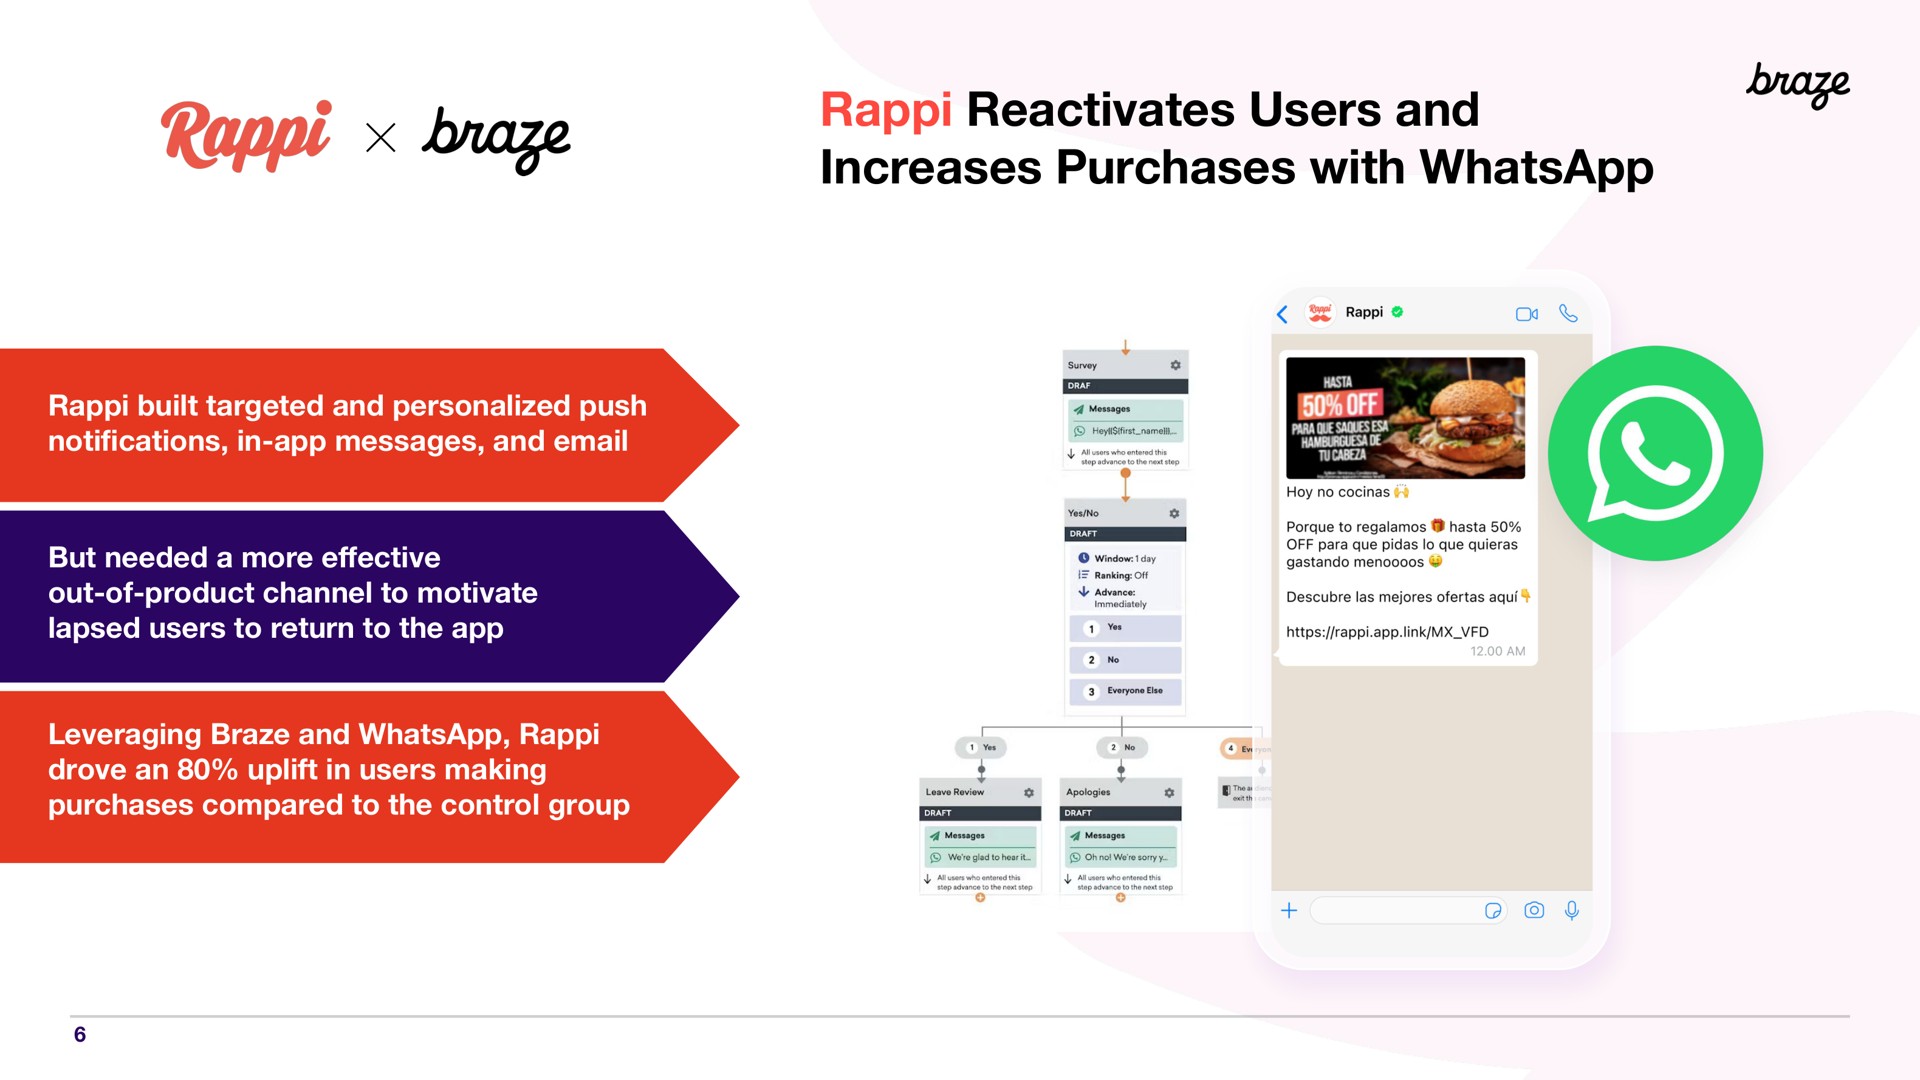 reactivates users and increases purchases with braze | Braze